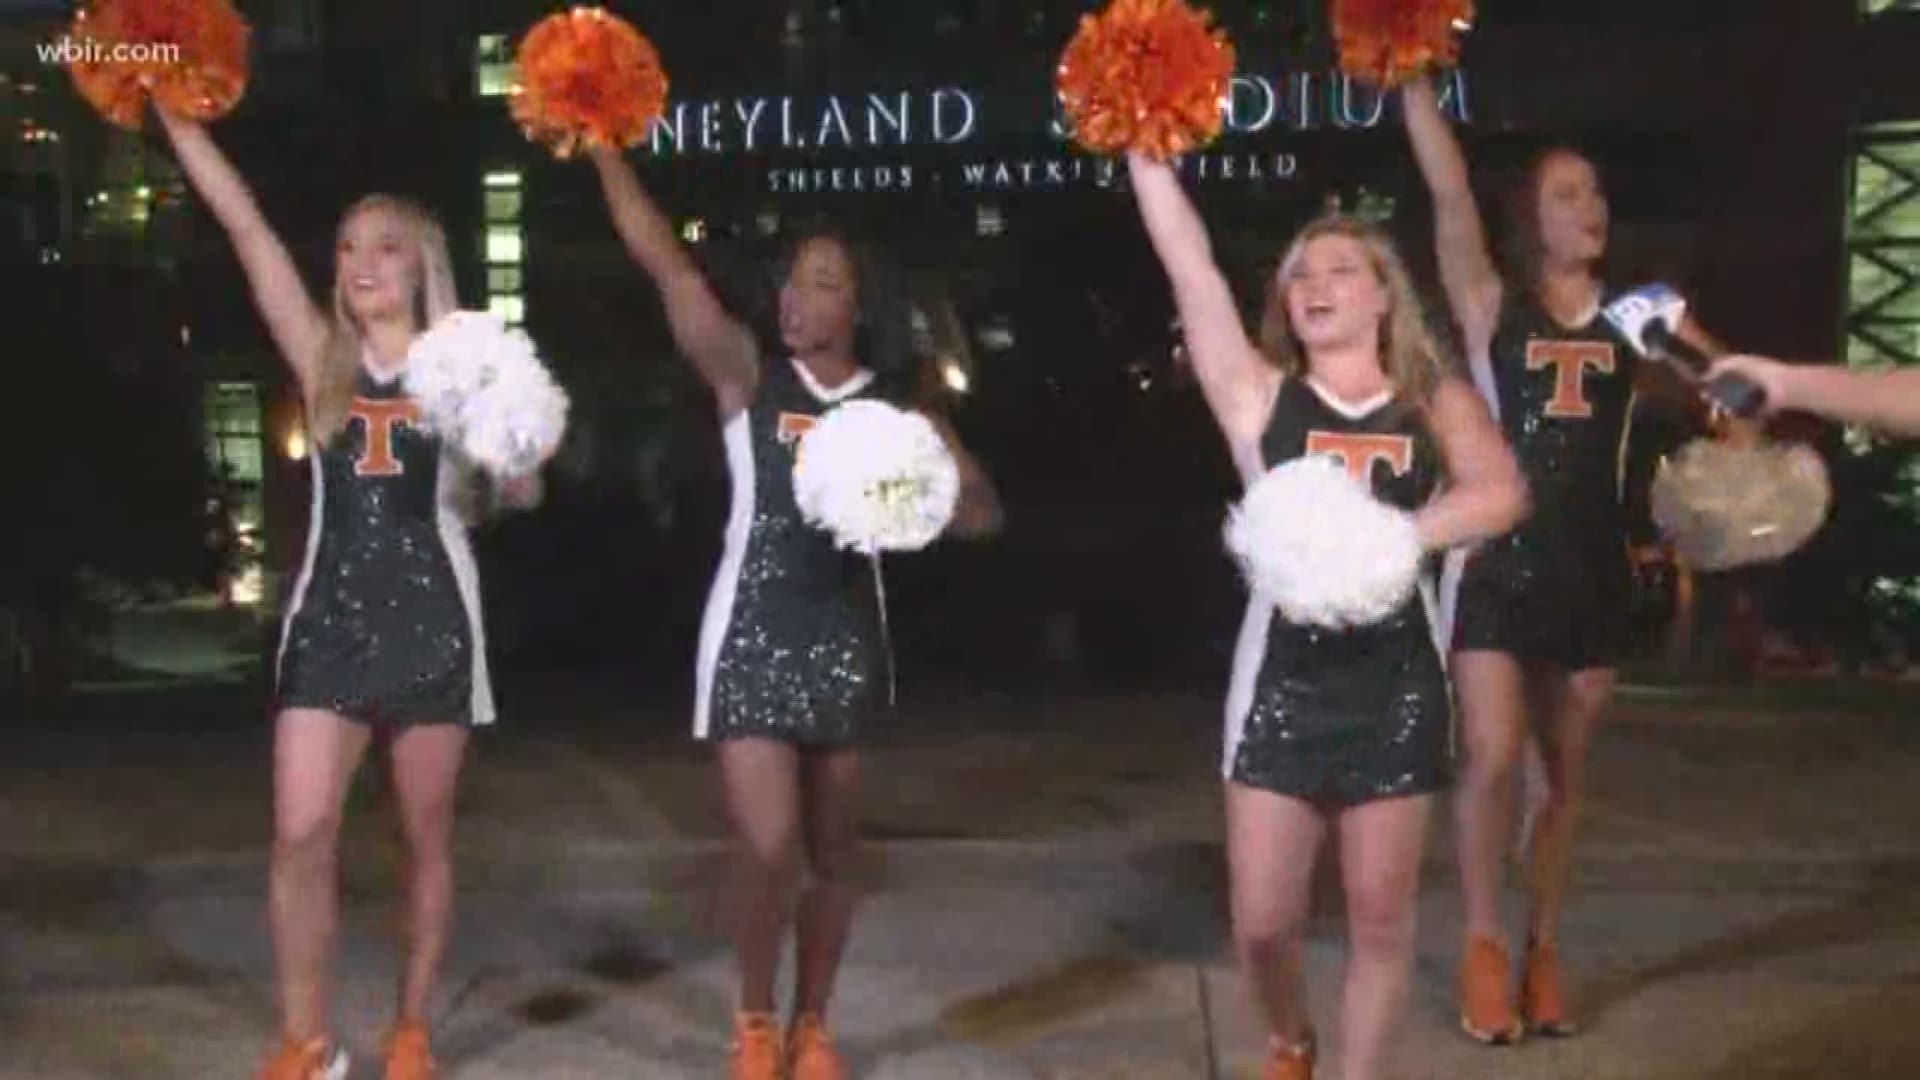 10News Anchor Abby Ham is with the UT Dance Team to get you in the spirit before the big game against Florida!